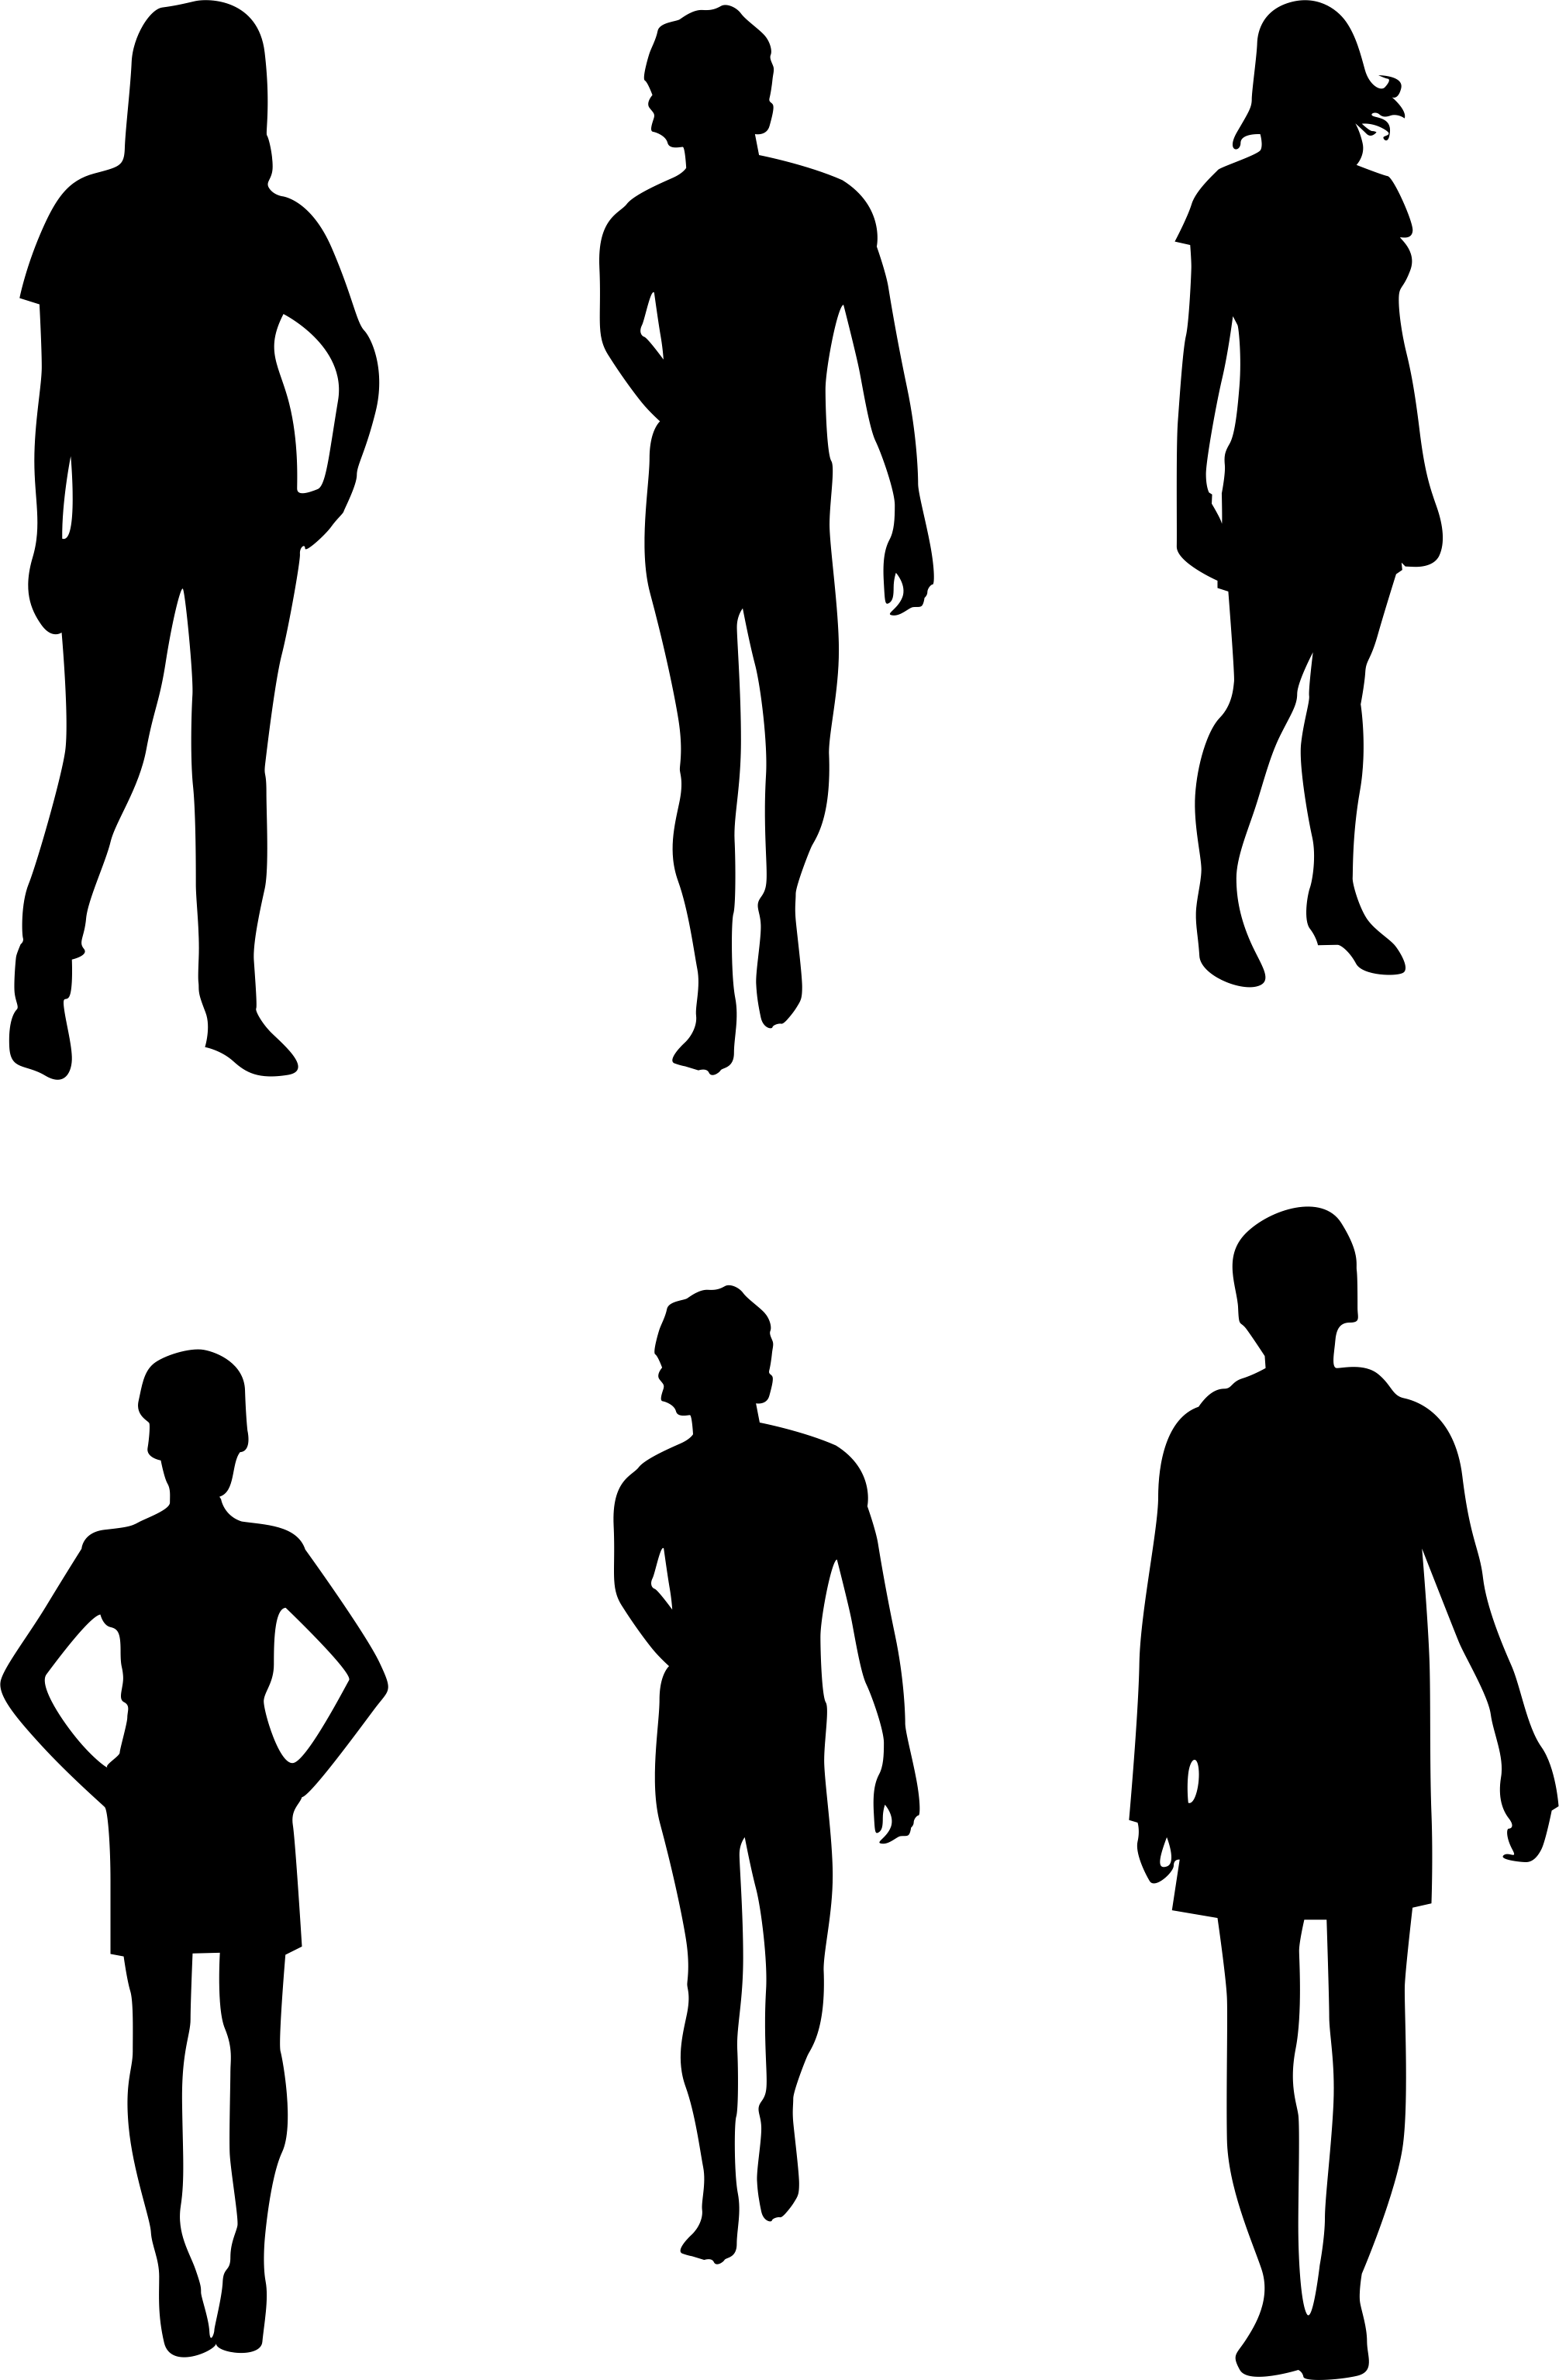 People Silhouettes Google Search Silhouette People Si - vrogue.co